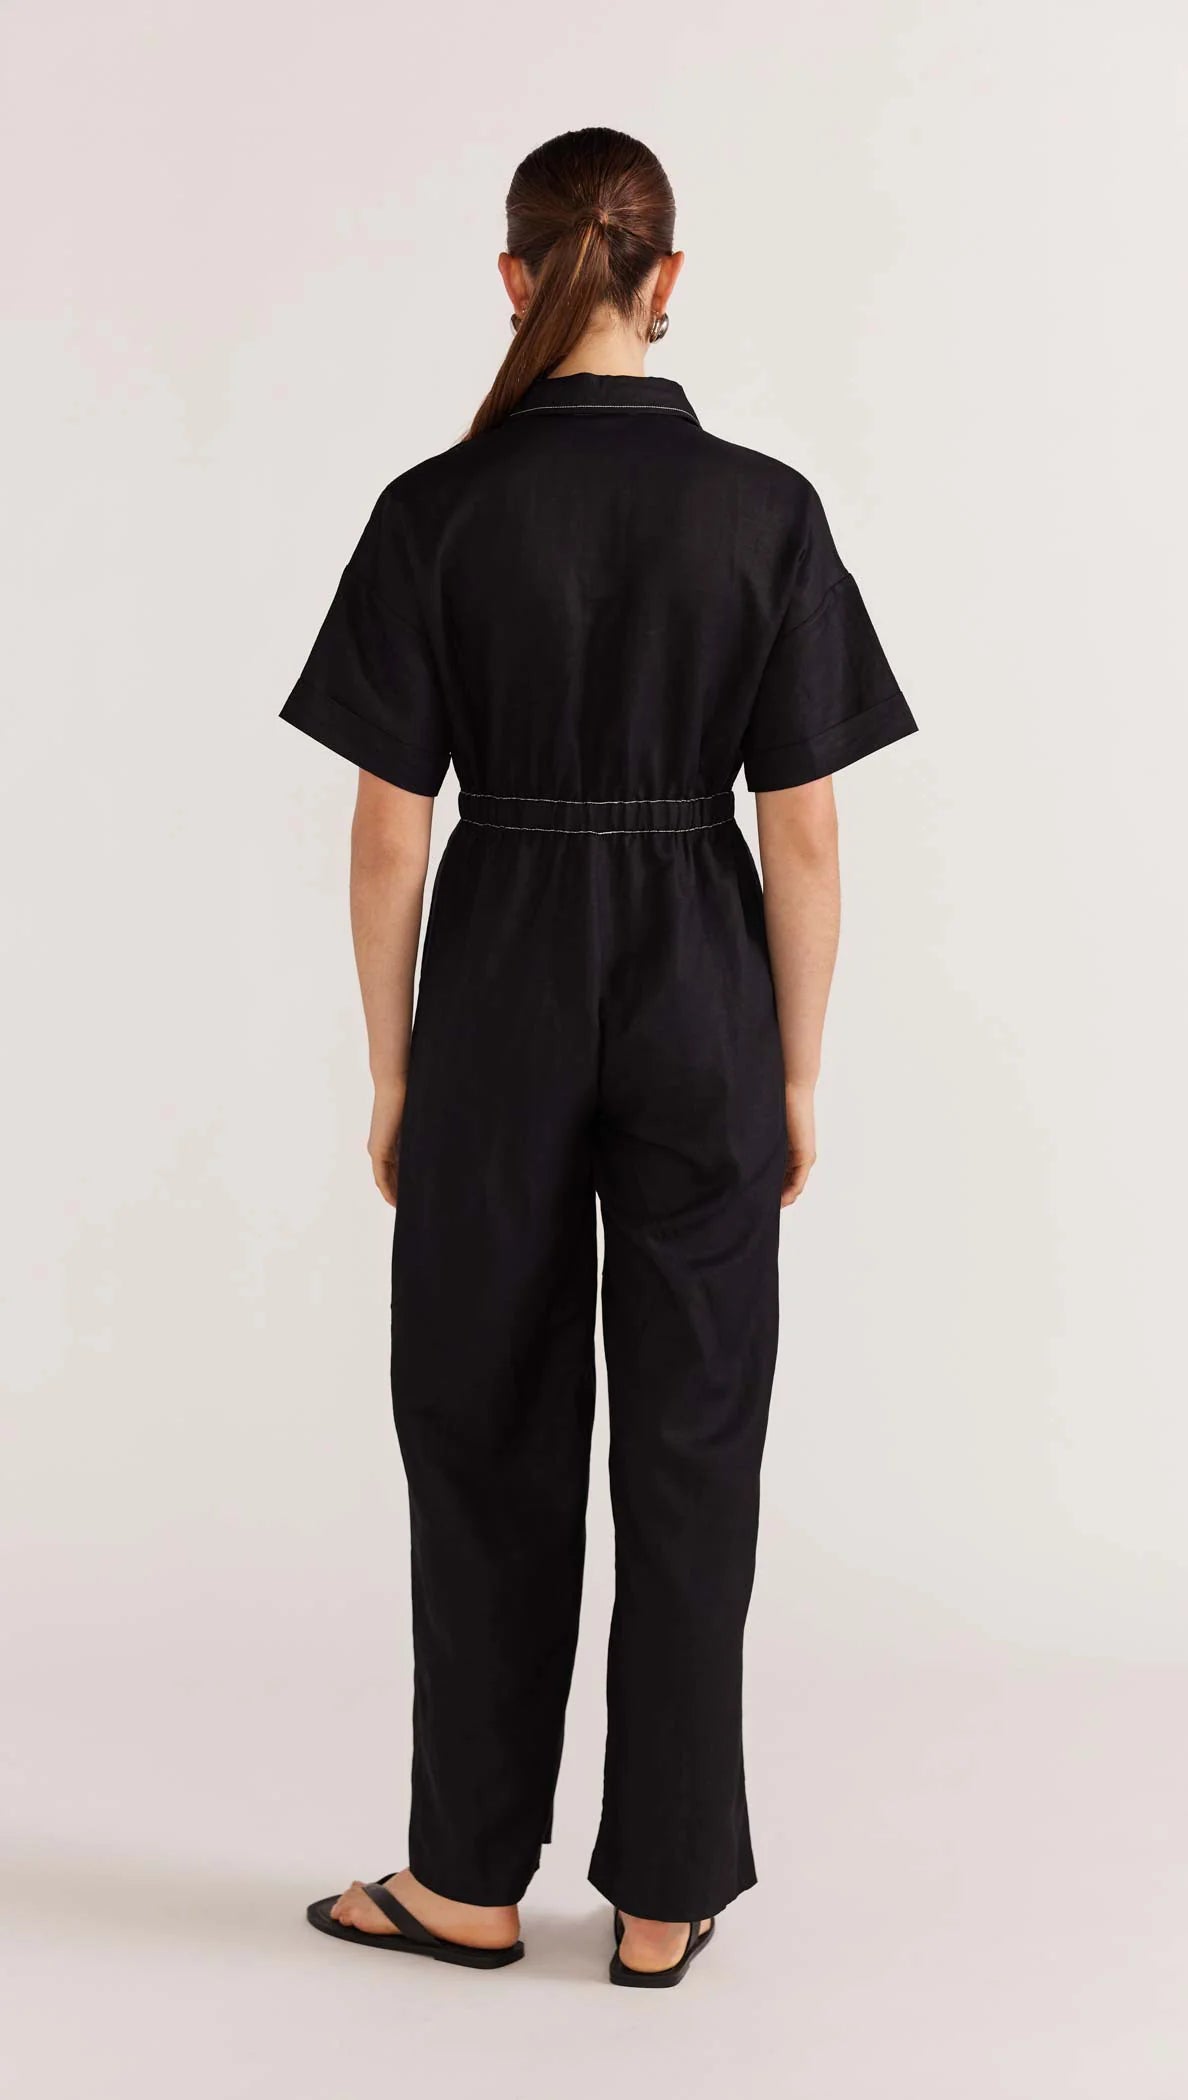 STAPLE THE LABEL Theory Jumpsuit